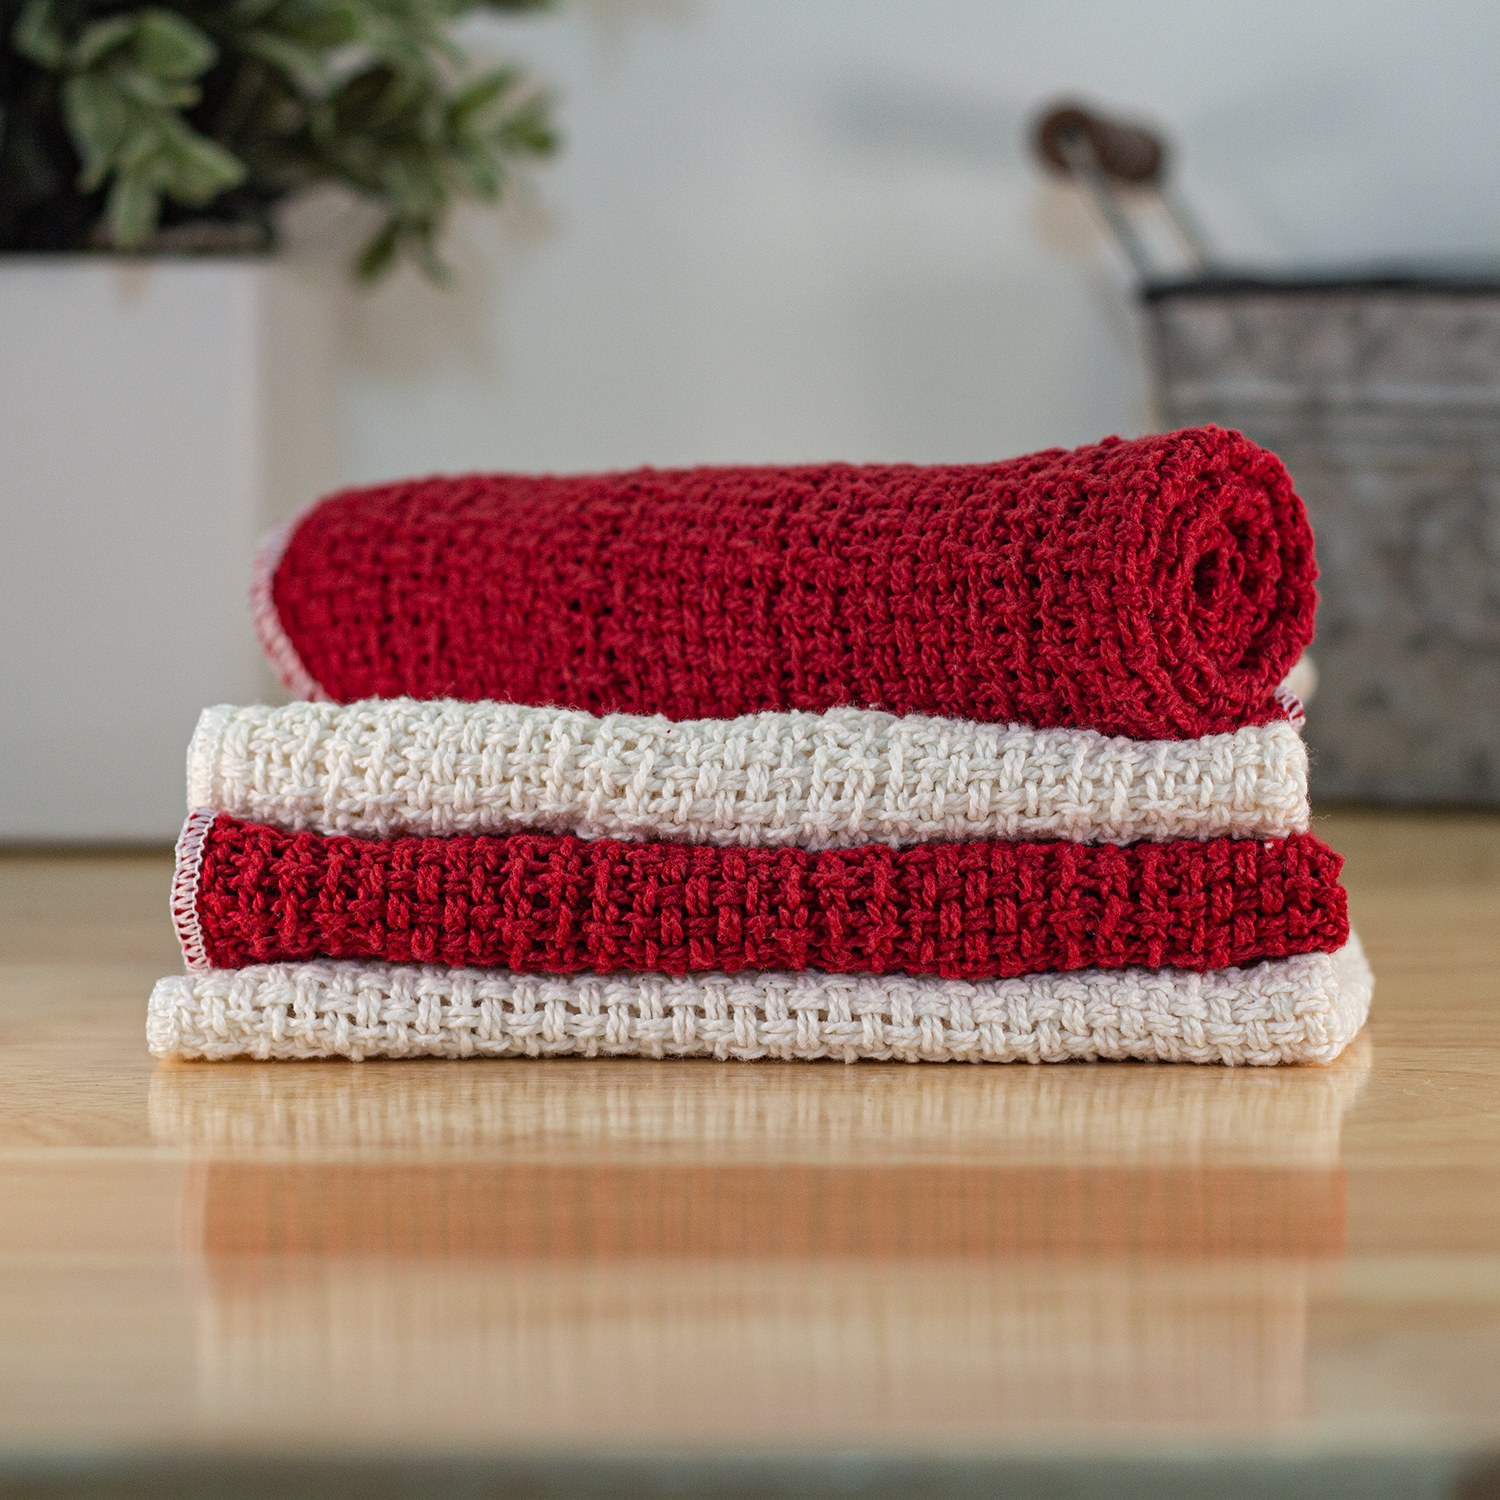 https://countrycottons.net/wp-content/uploads/Dishcloths_Red_Glam.jpg